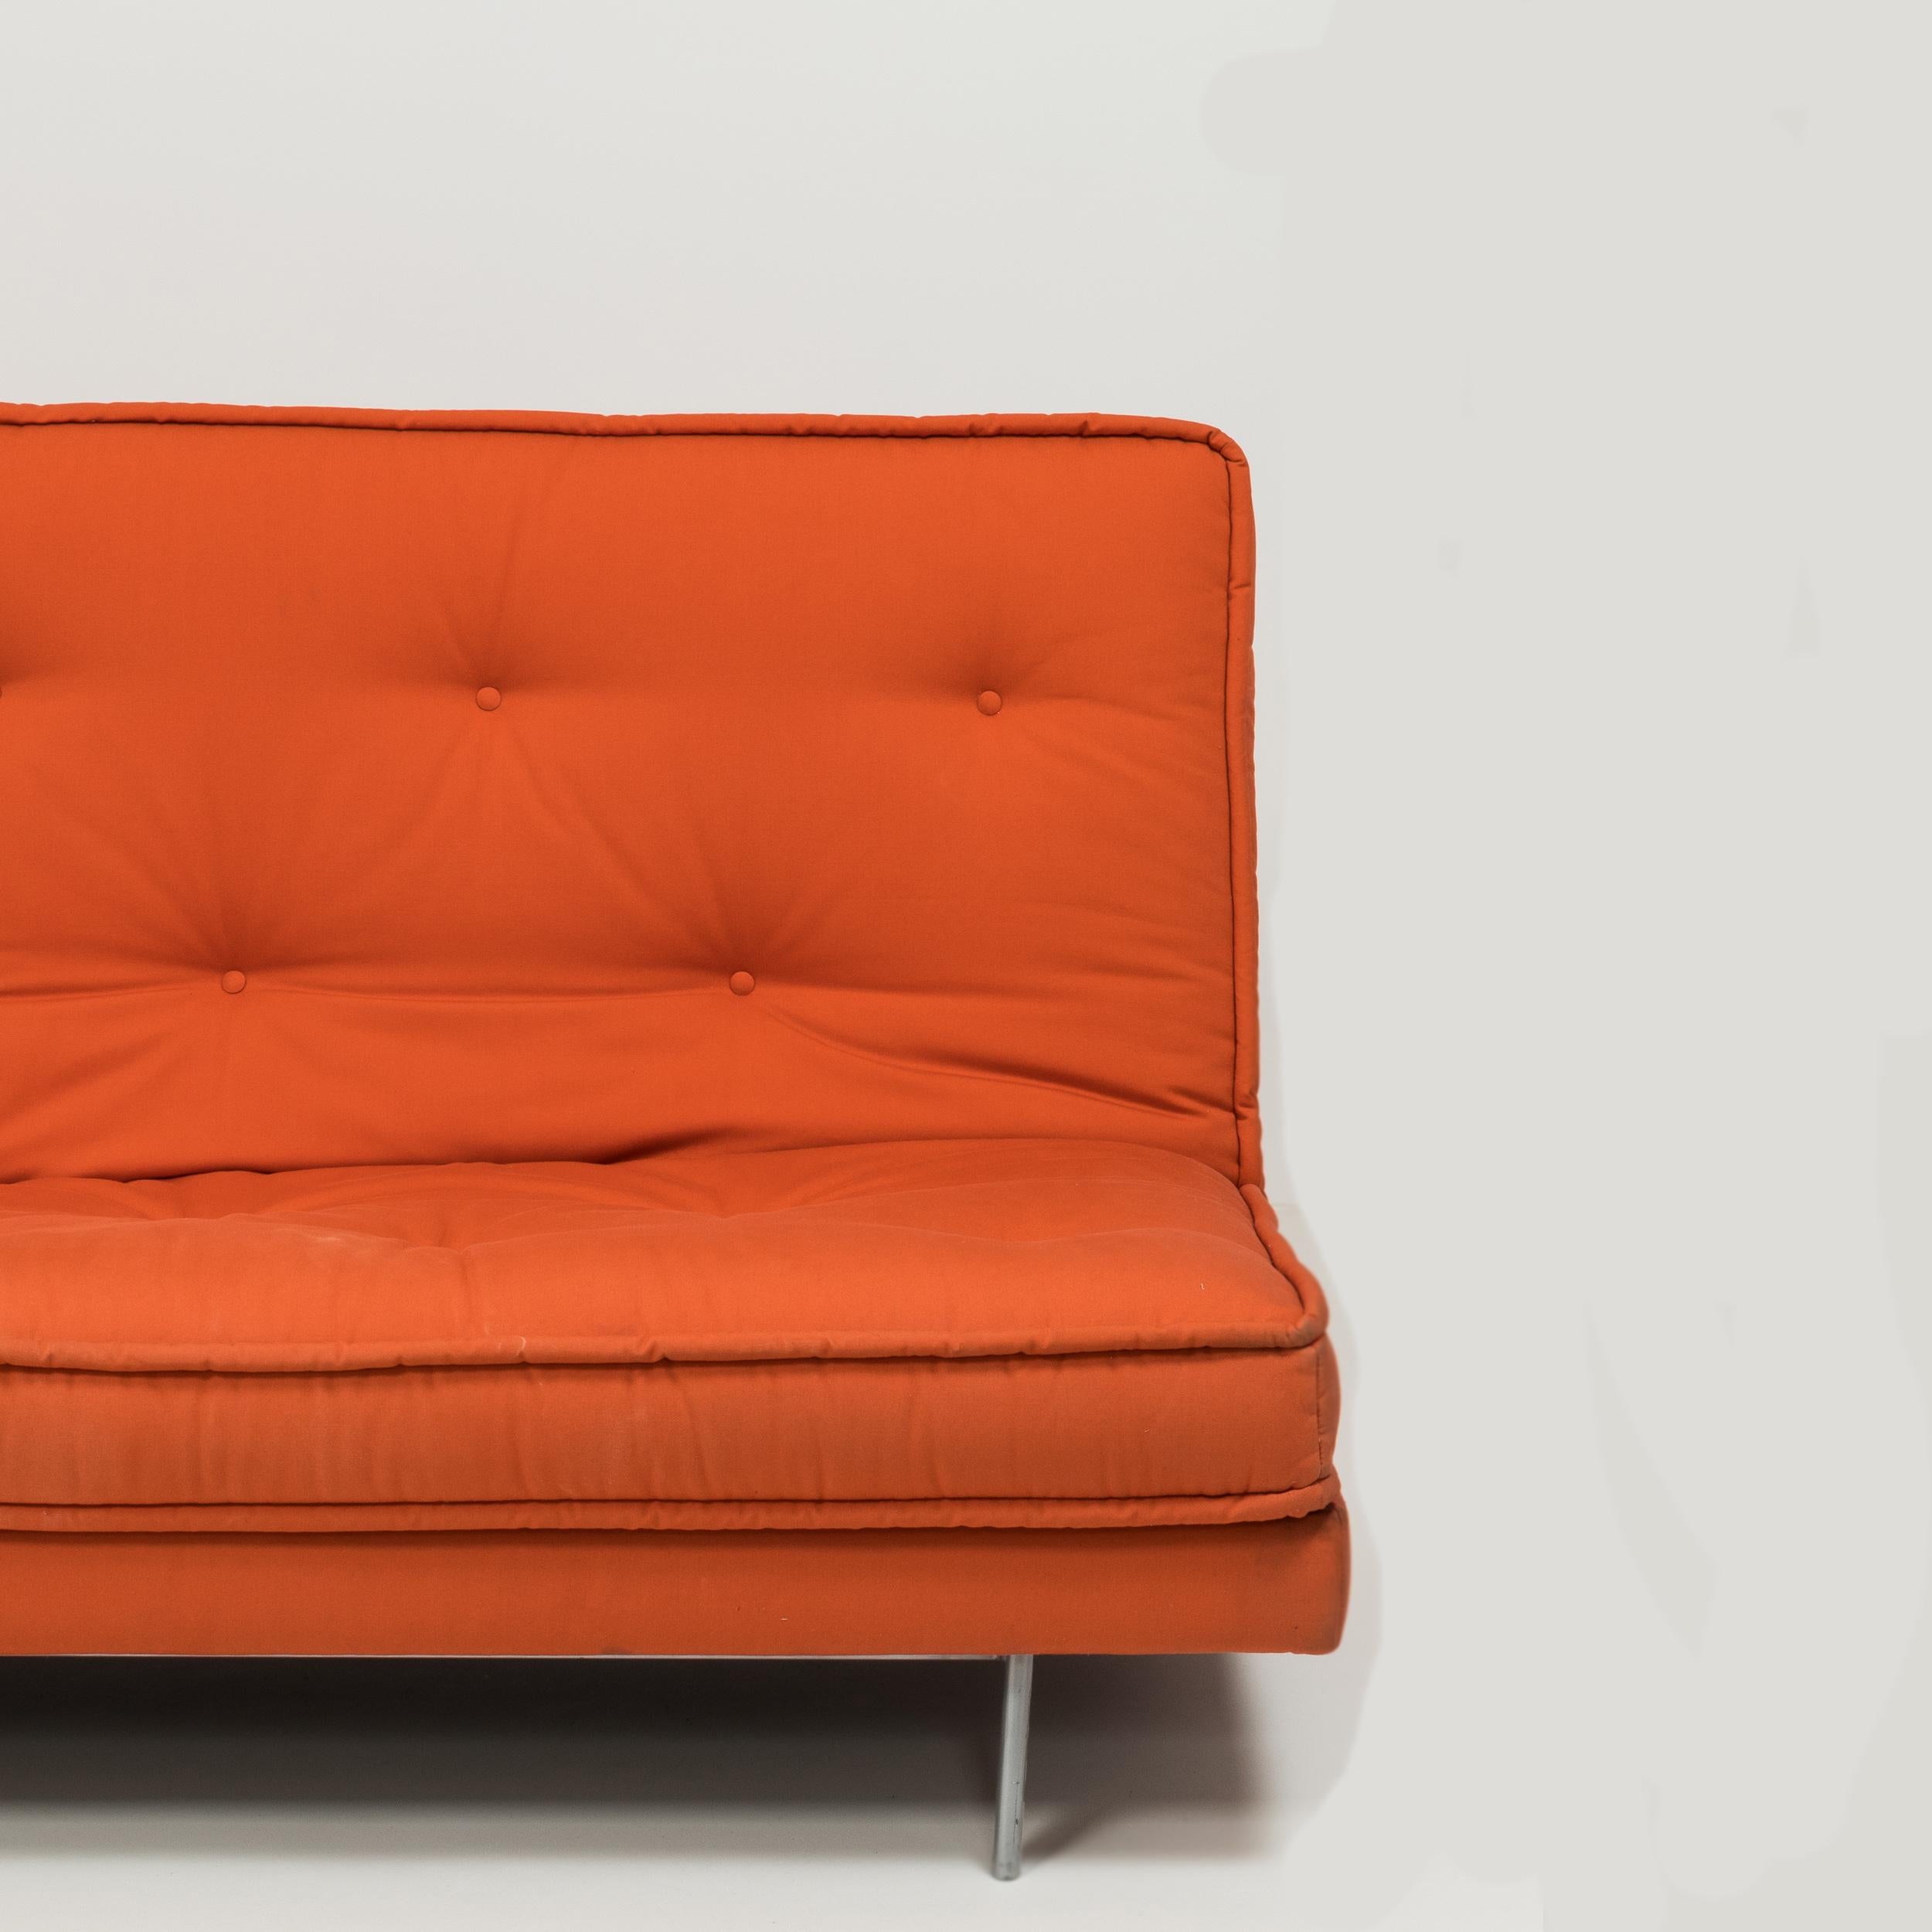 French Nomade Express Red Sofa Bed by Didier Gomez for Linge Roset